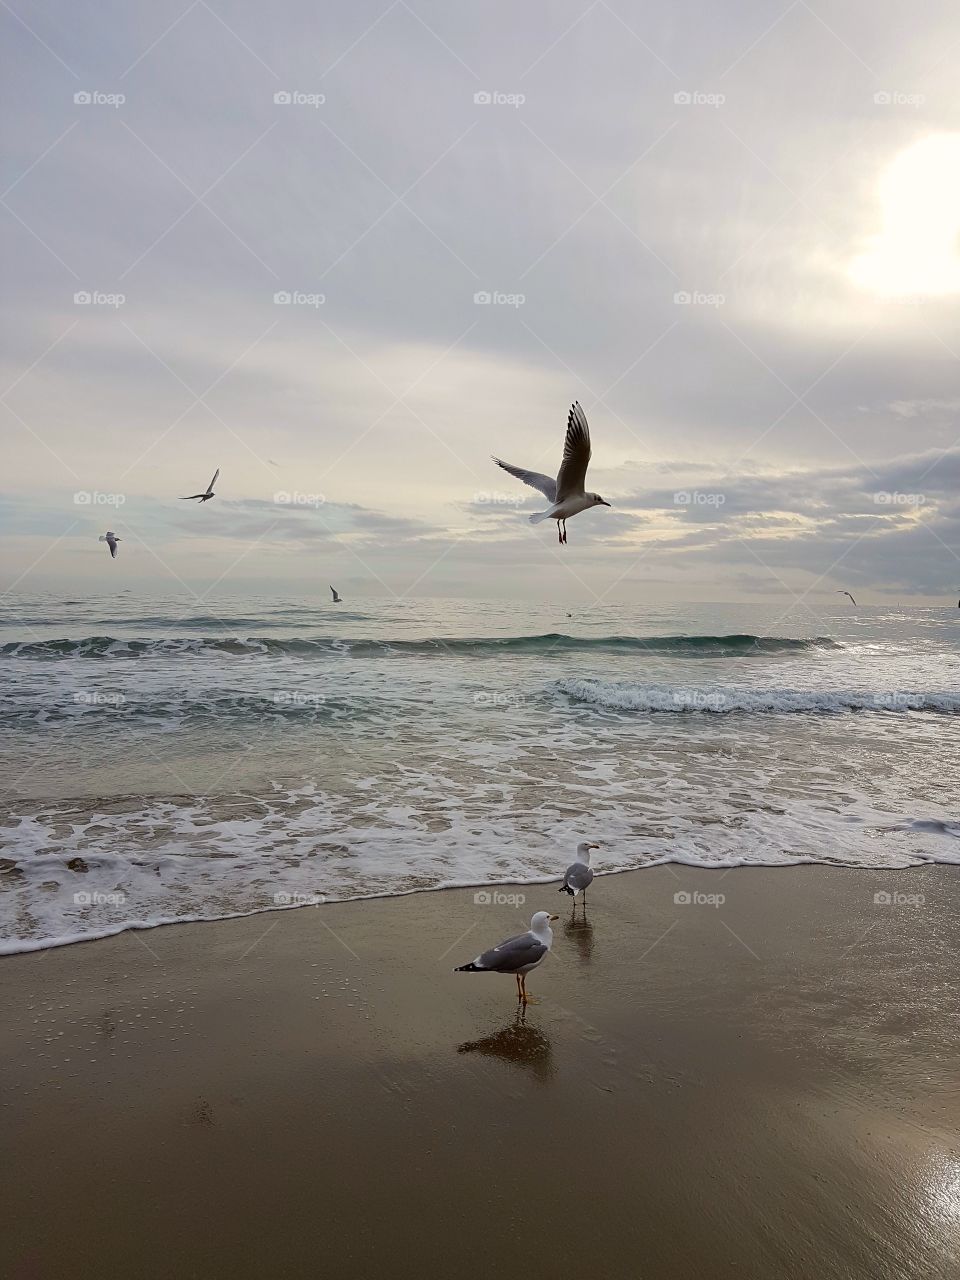 Seagulls resting on the beach and flying over the sea